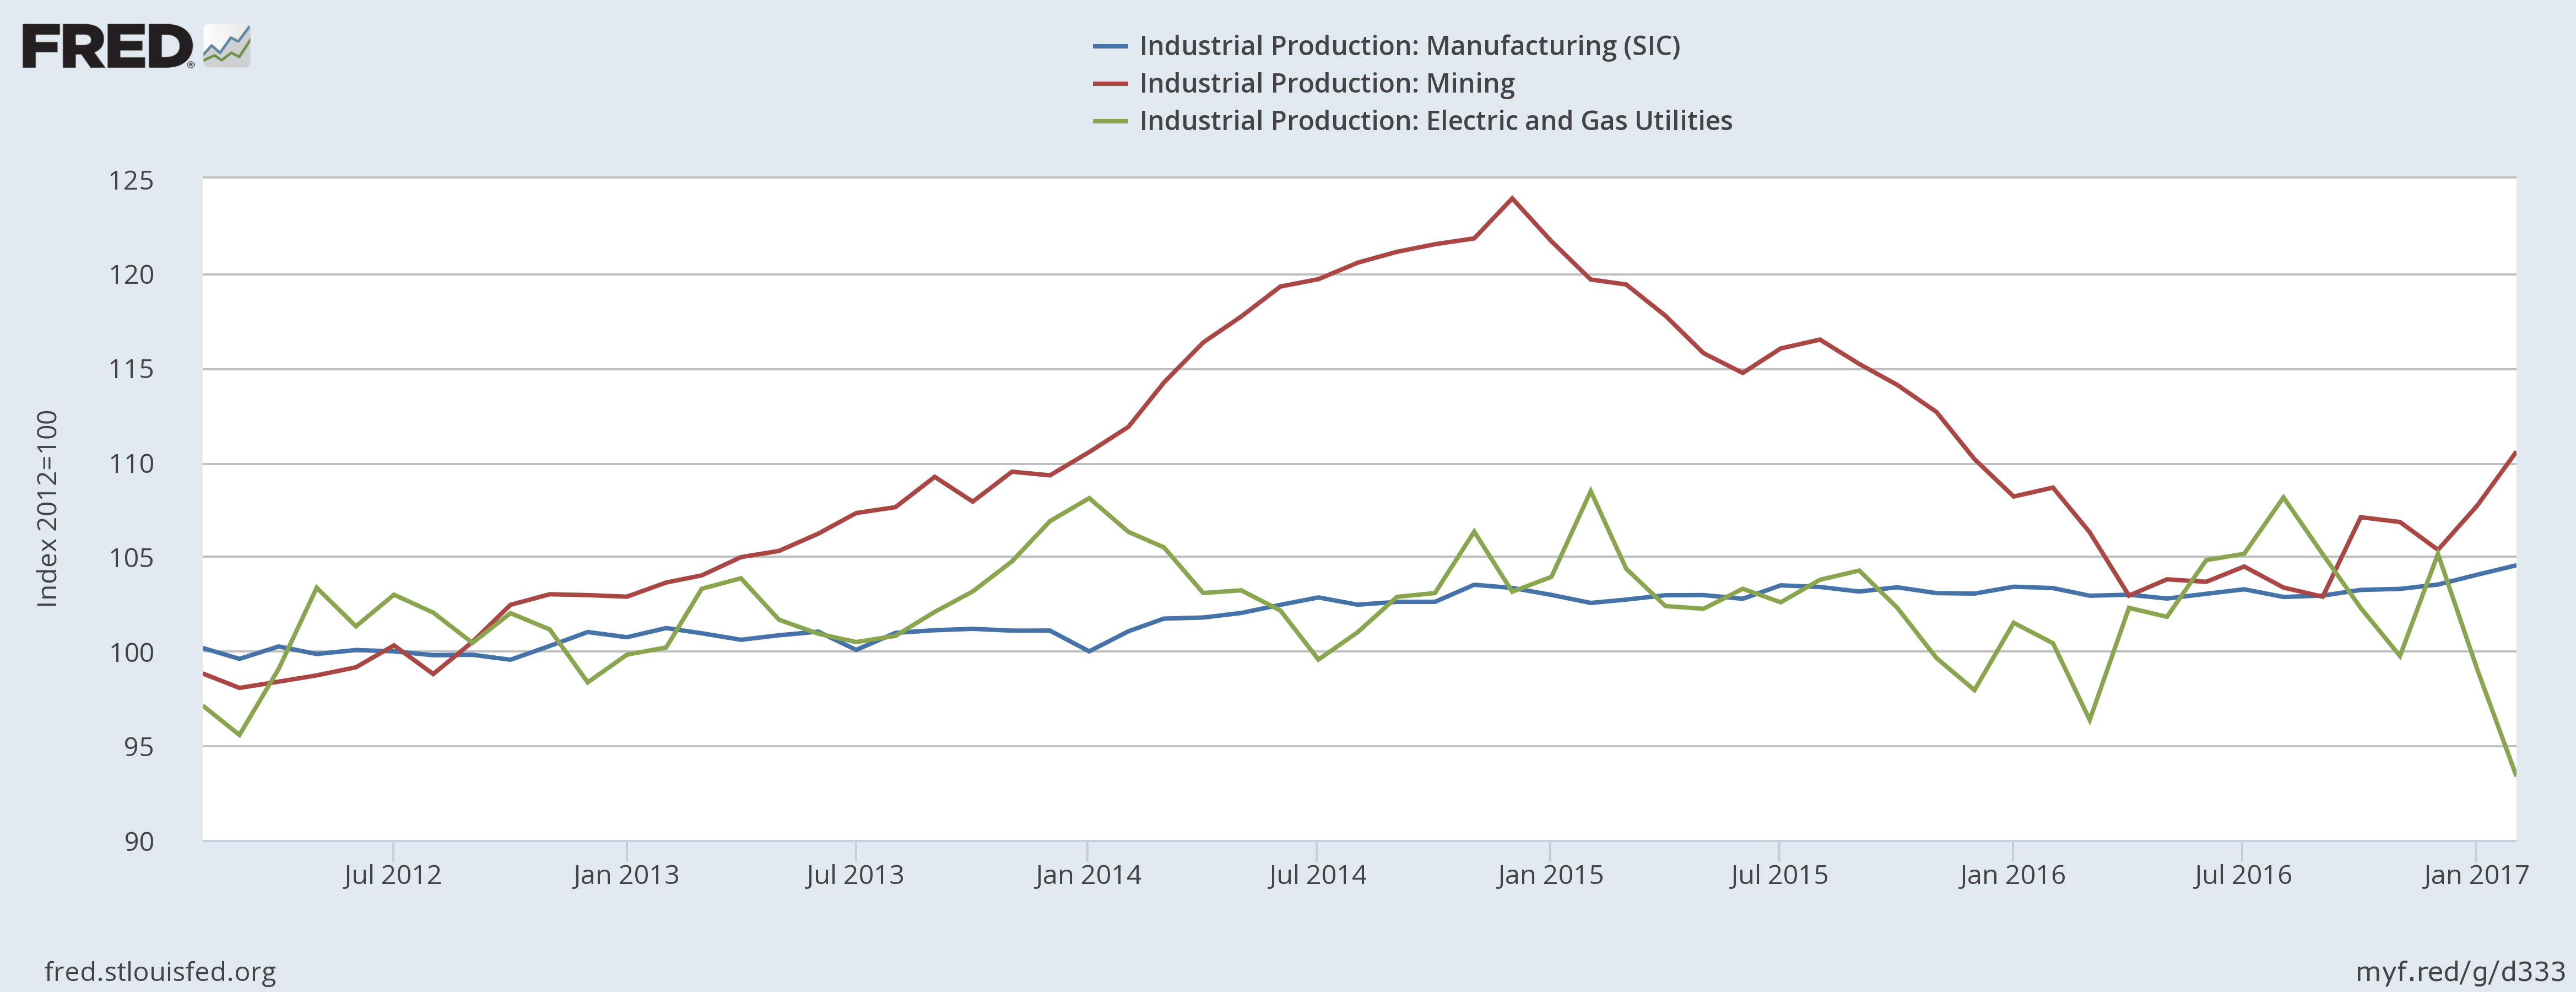 Industrial Production Chart 2